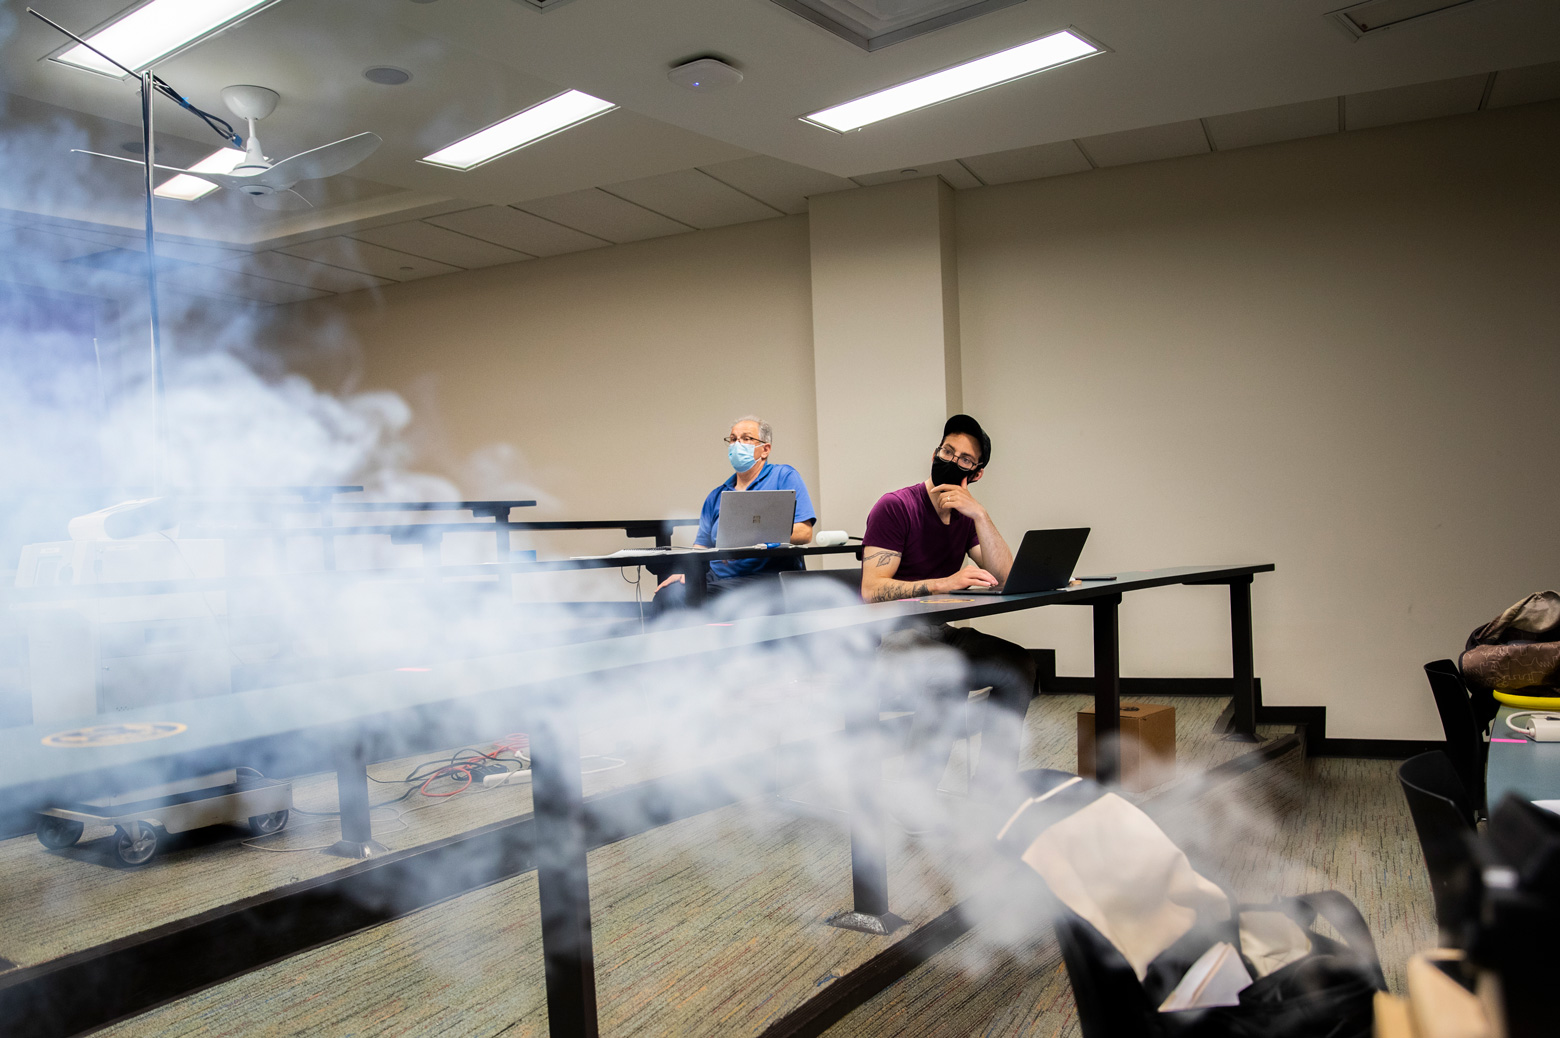 Jesse Capecelatro and Andre Boehman observe a smoke machine as they study how particles move through a classroom.